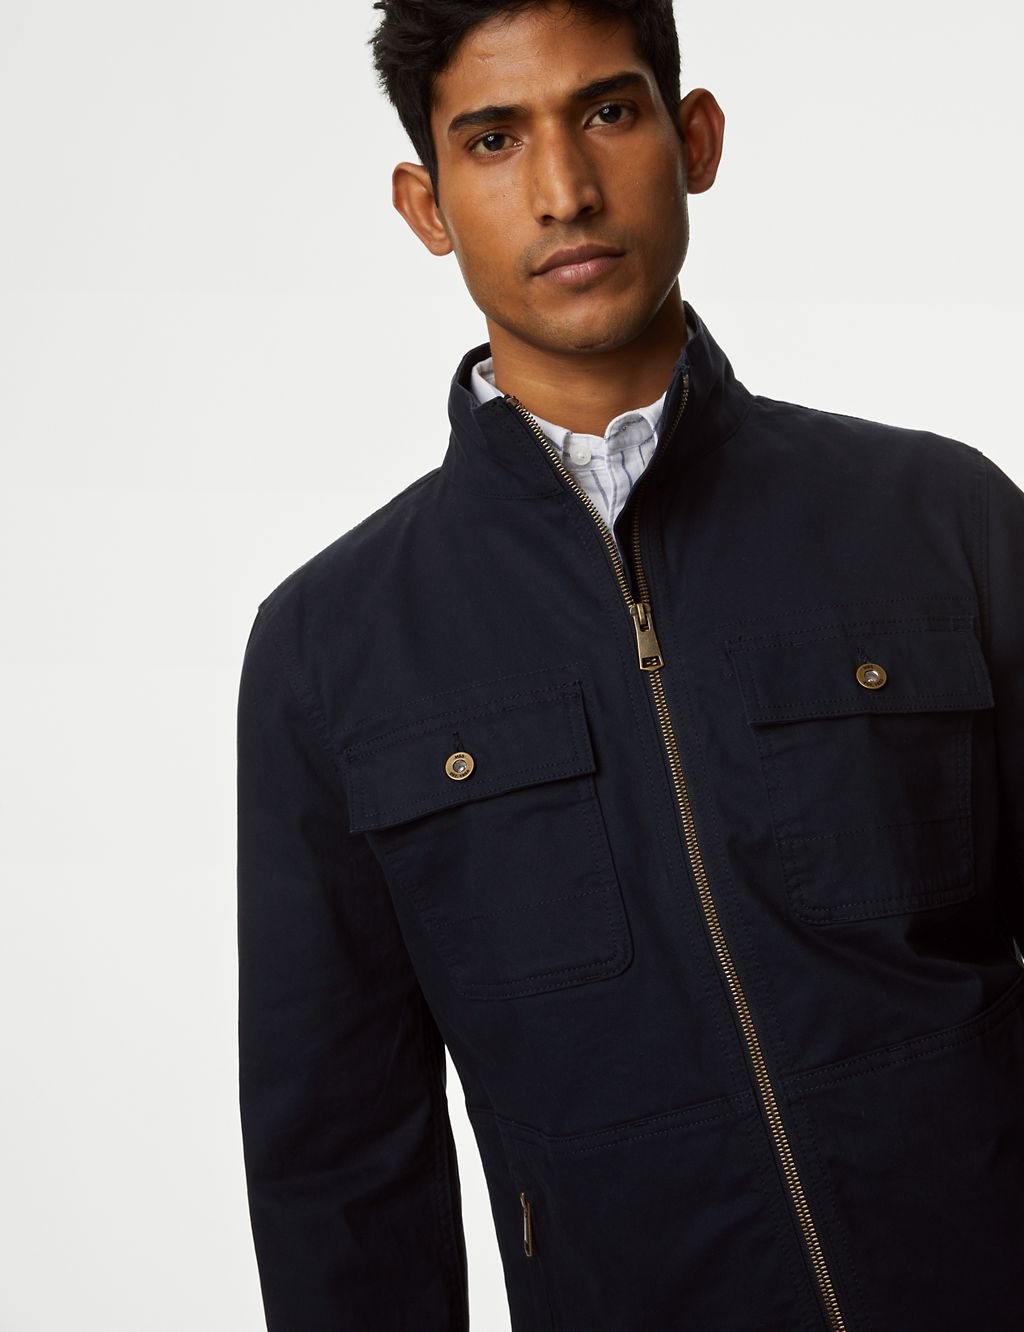 Cotton Rich Jacket with Stormwear™ 2 of 7